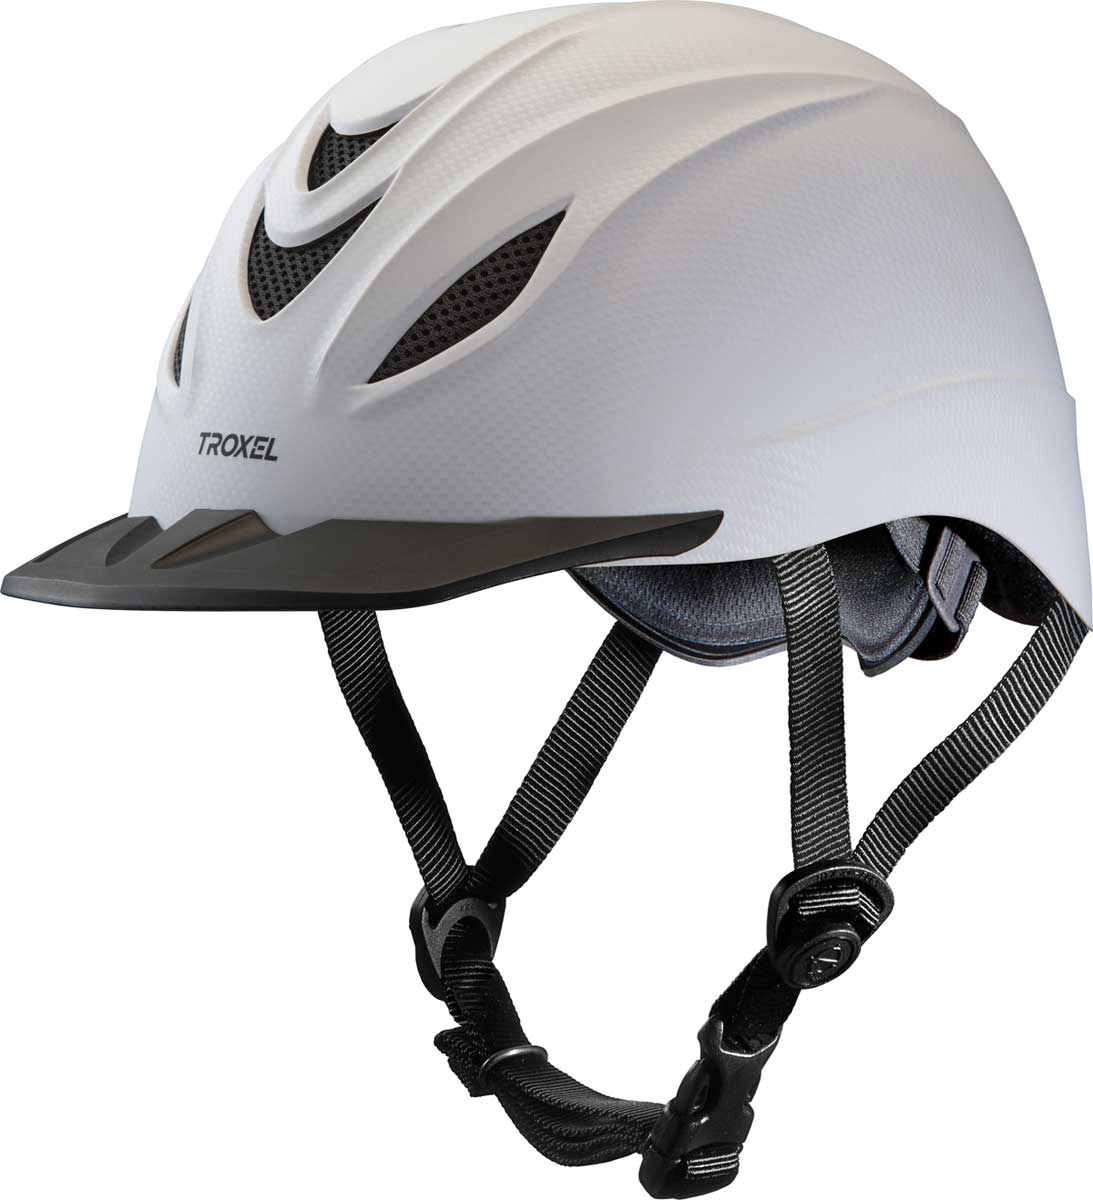 TROXEL SPORT HORSE SCHOOLING SAFETY RIDING HELMET BLACK AND WHITE ALL PURPOSE 